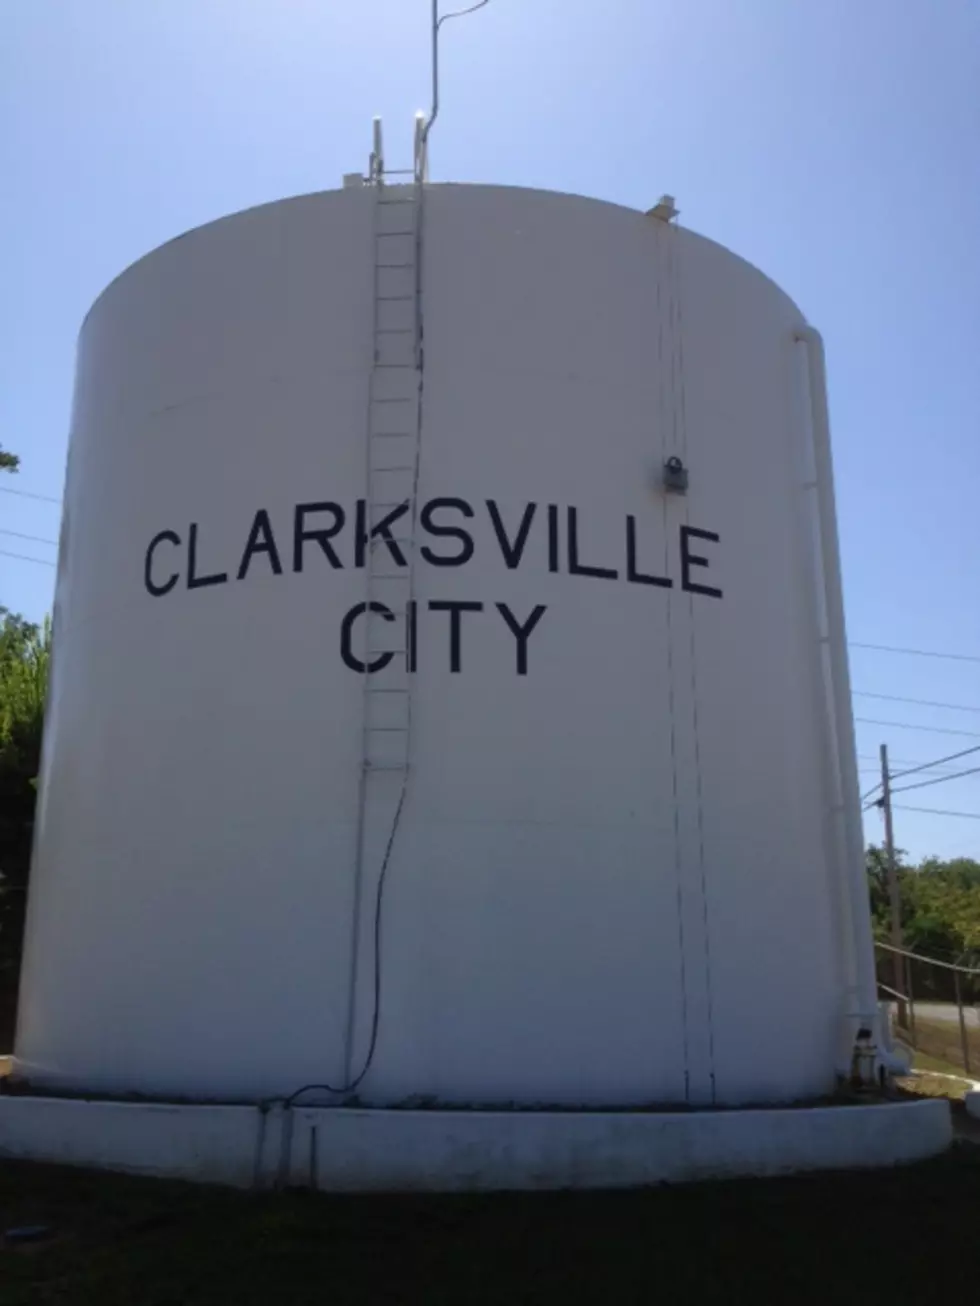 East Texas Town’s Water Supply Back to Normal